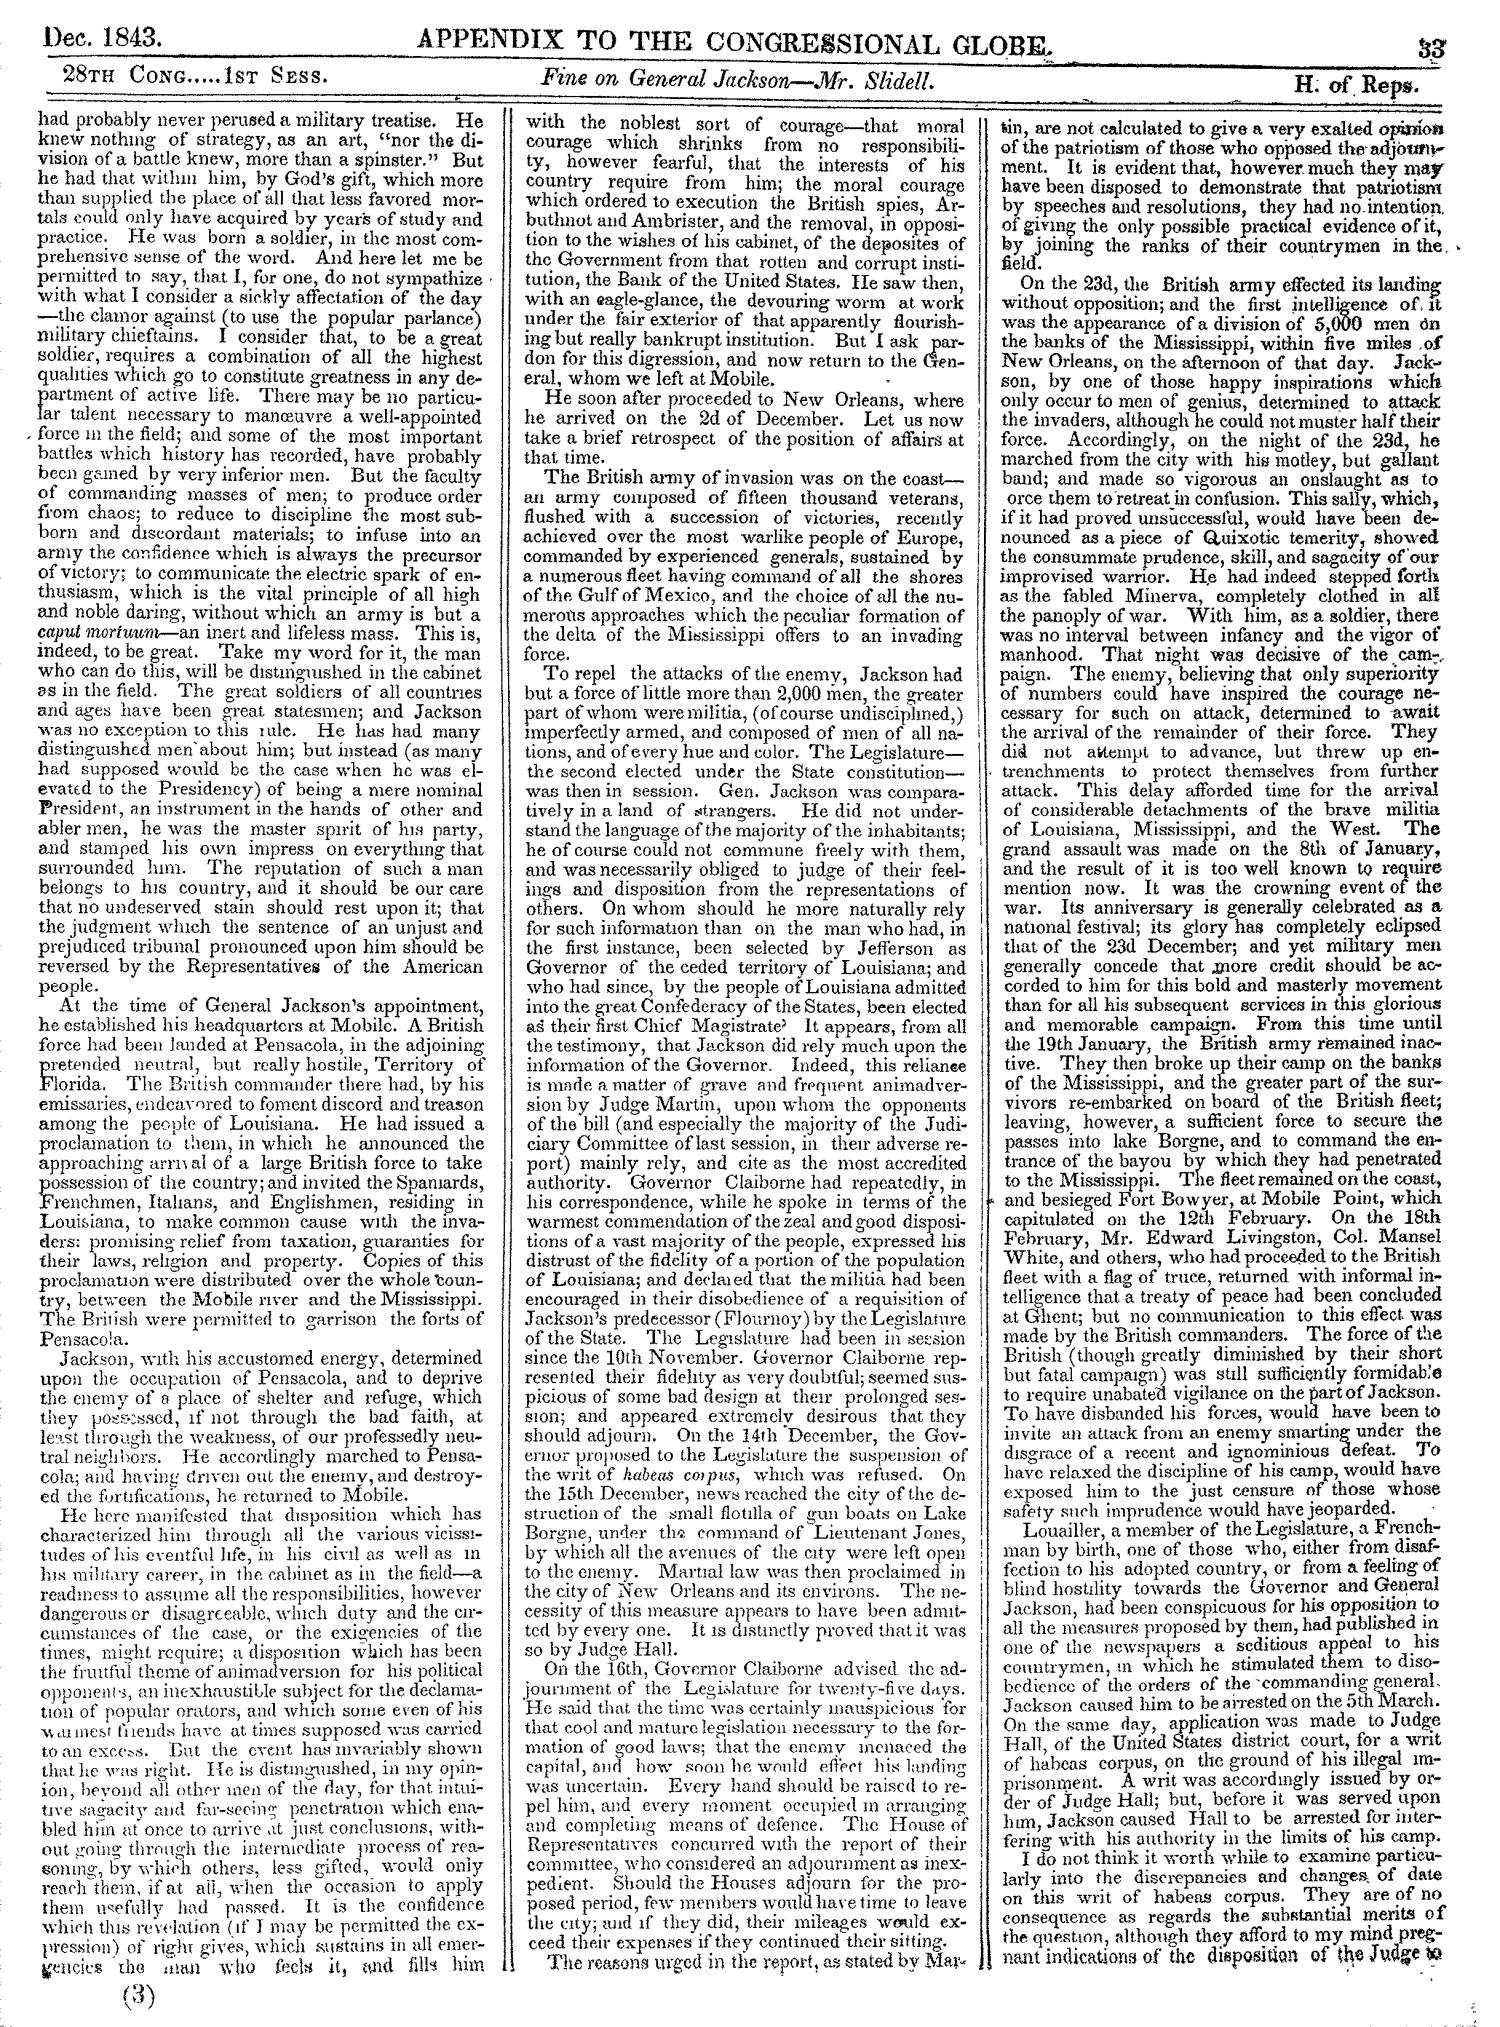 The Congressional Globe, Volume 13, Part 2: Twenty-Eighth Congress, First Session
                                                
                                                    33
                                                